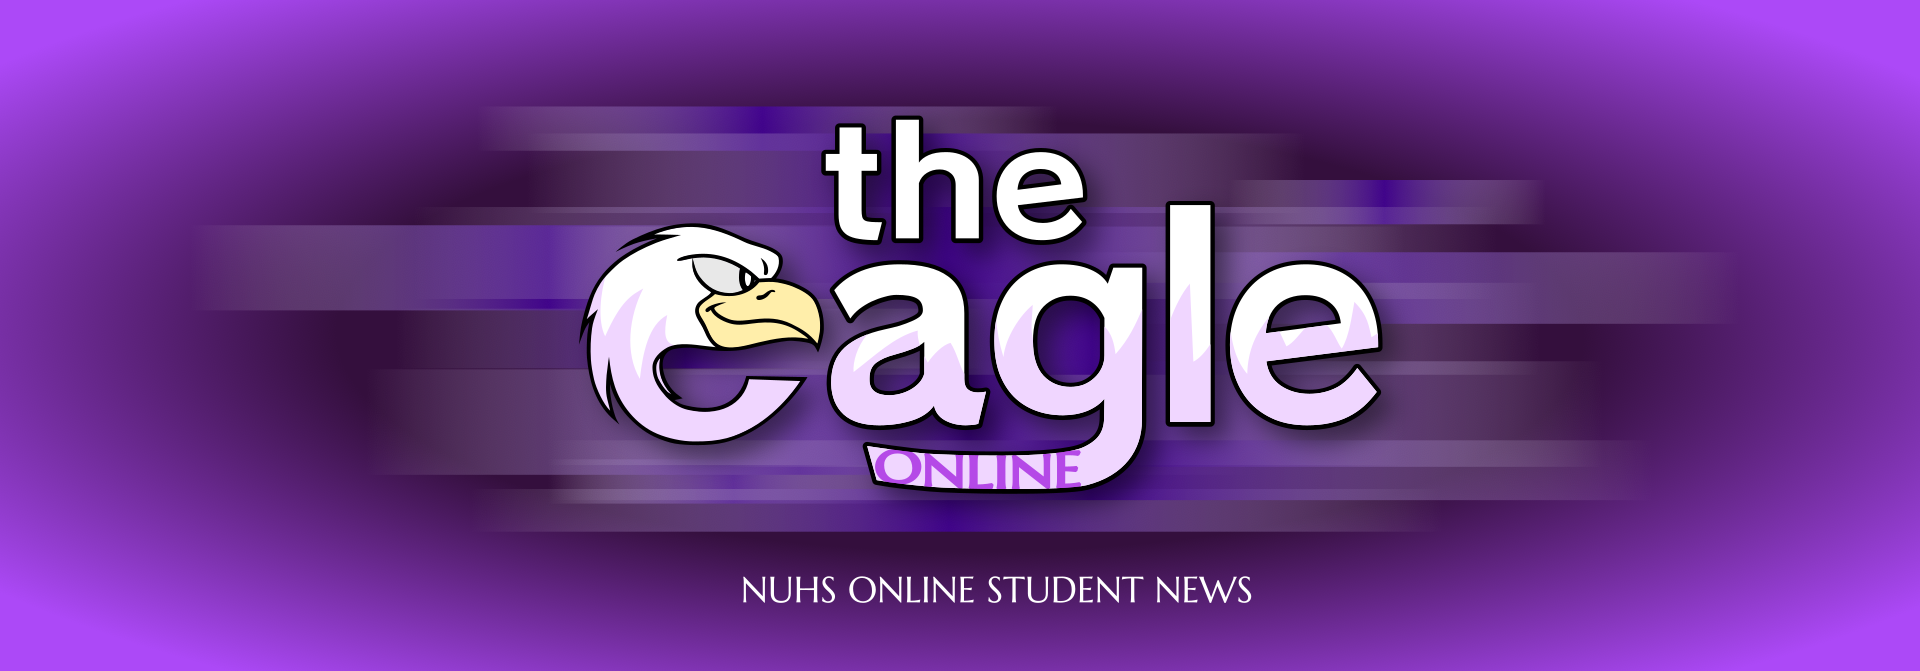 The Eagle Online